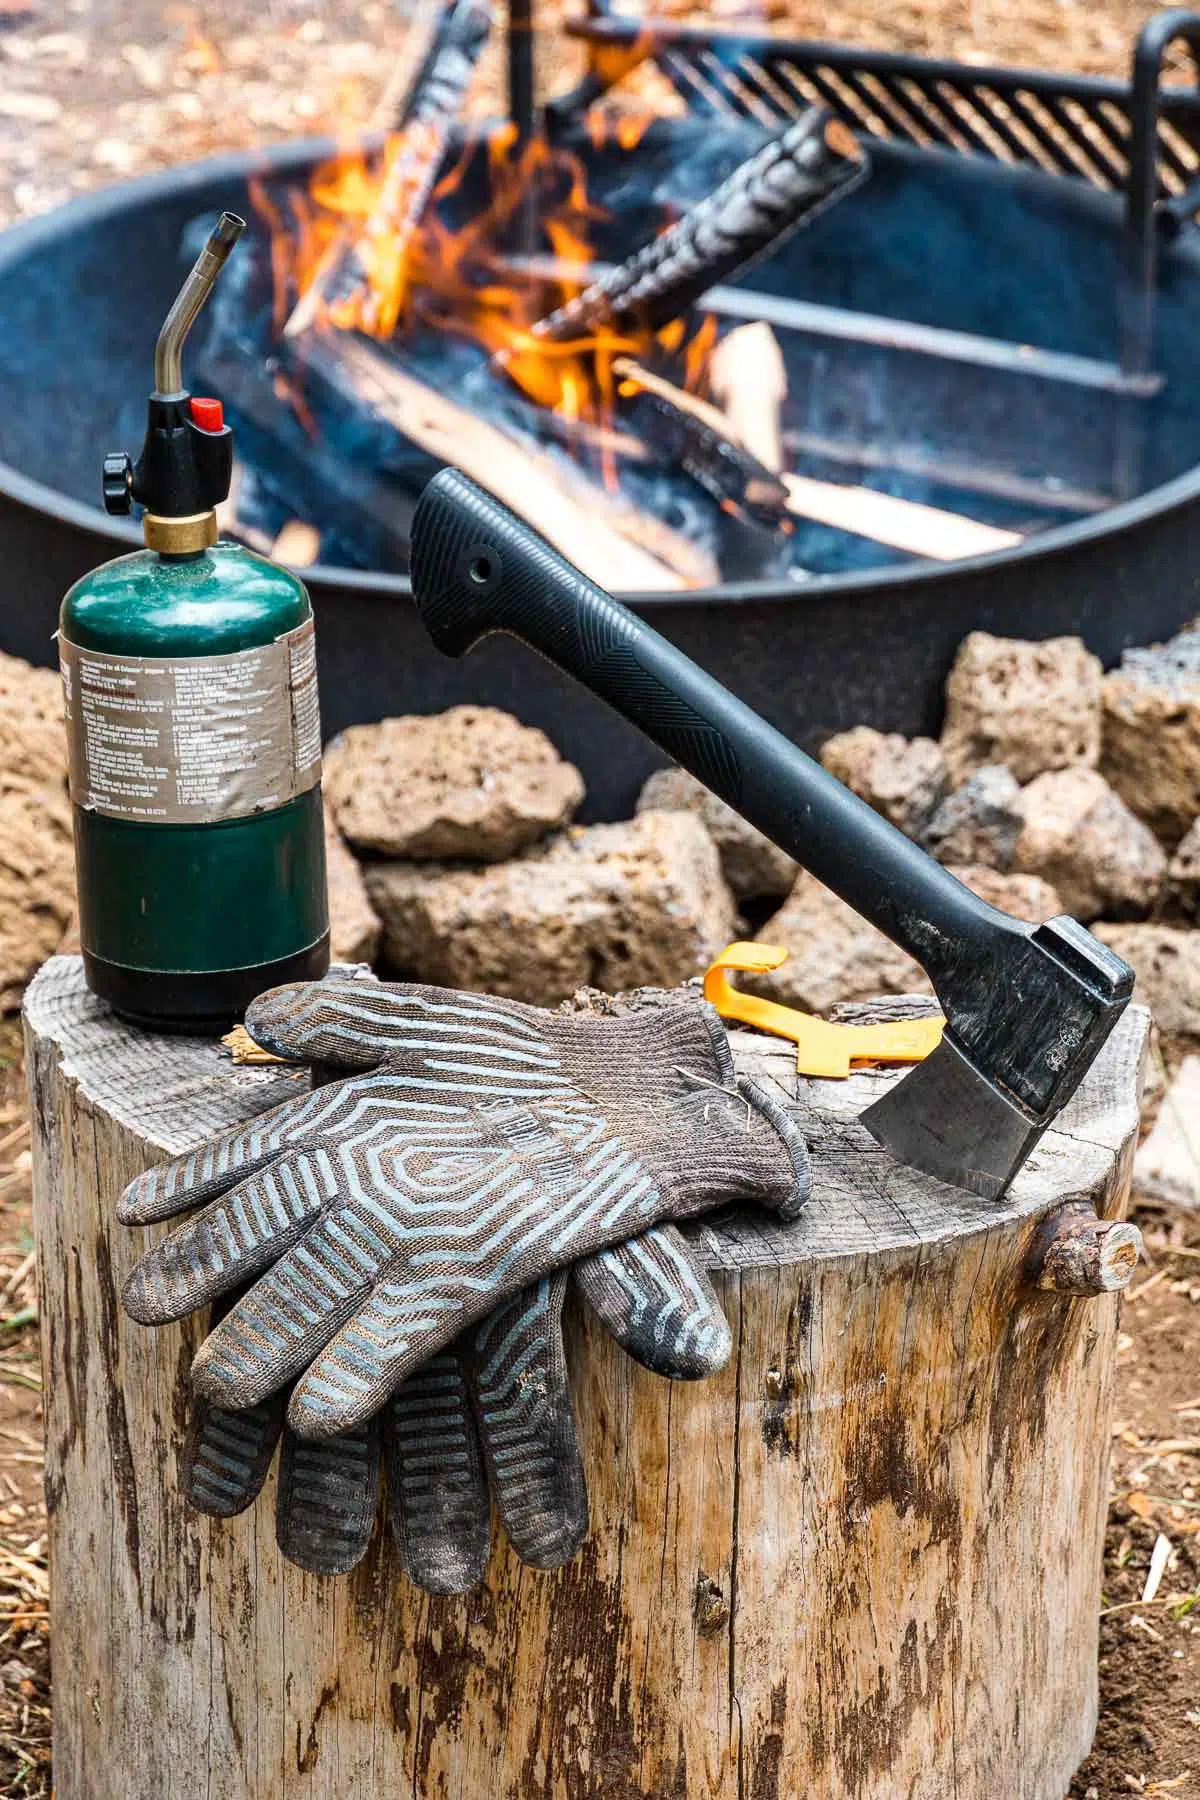 Torch, hatchet, and heat proof gloves arranged on a log with a campfire in the background